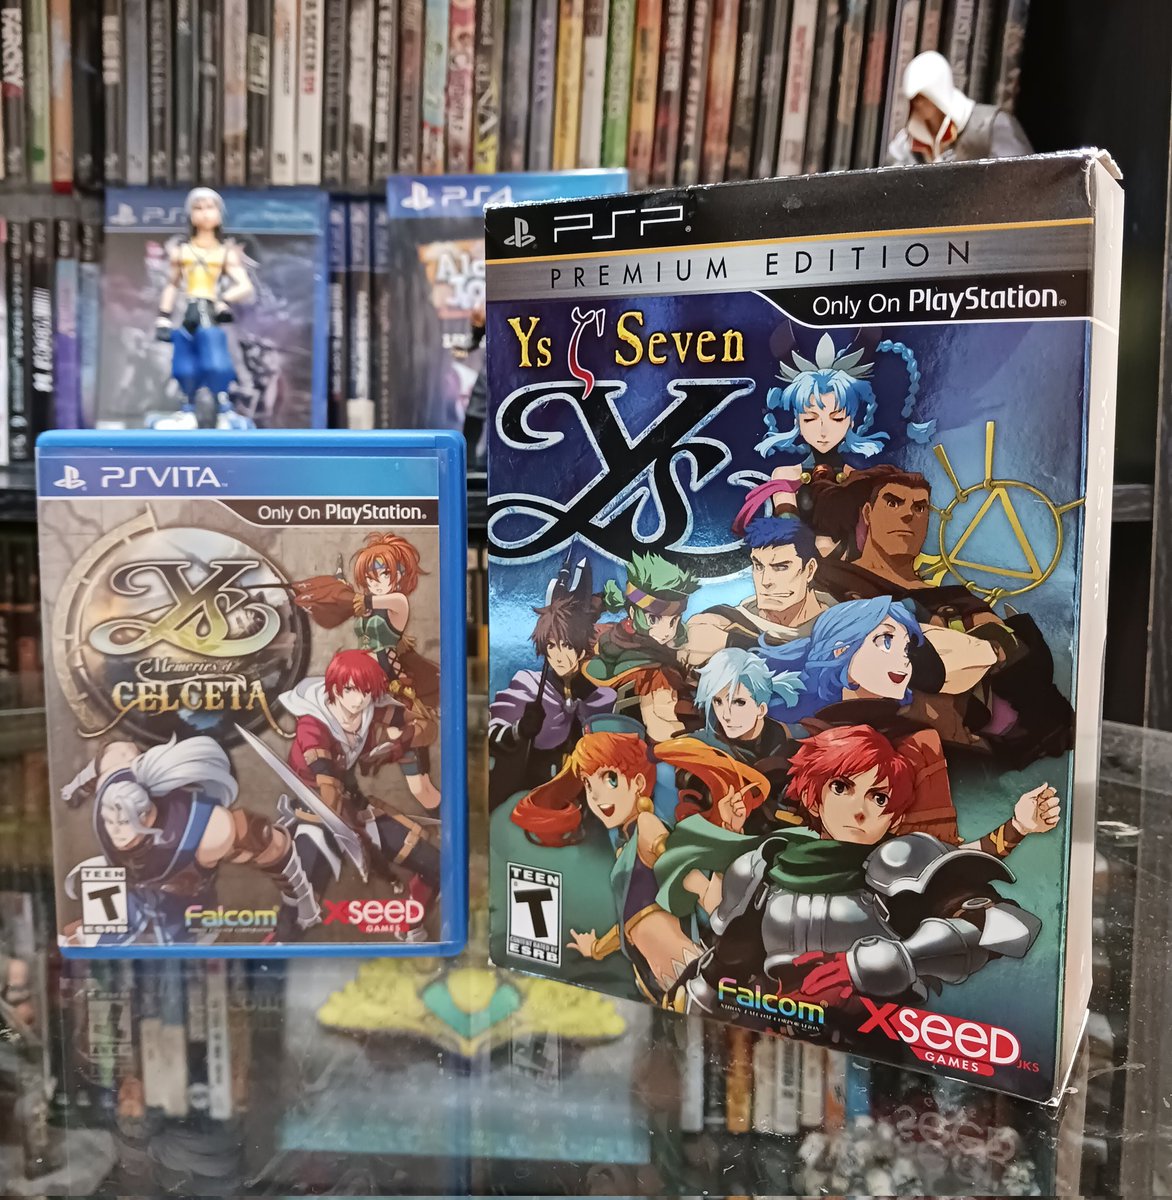 A couple of Ys beauties for today! Still on a lookout for more rpg goodies 👀
#PSPWednesday #WednesVitaday
#PSParadise #ShareYourGames